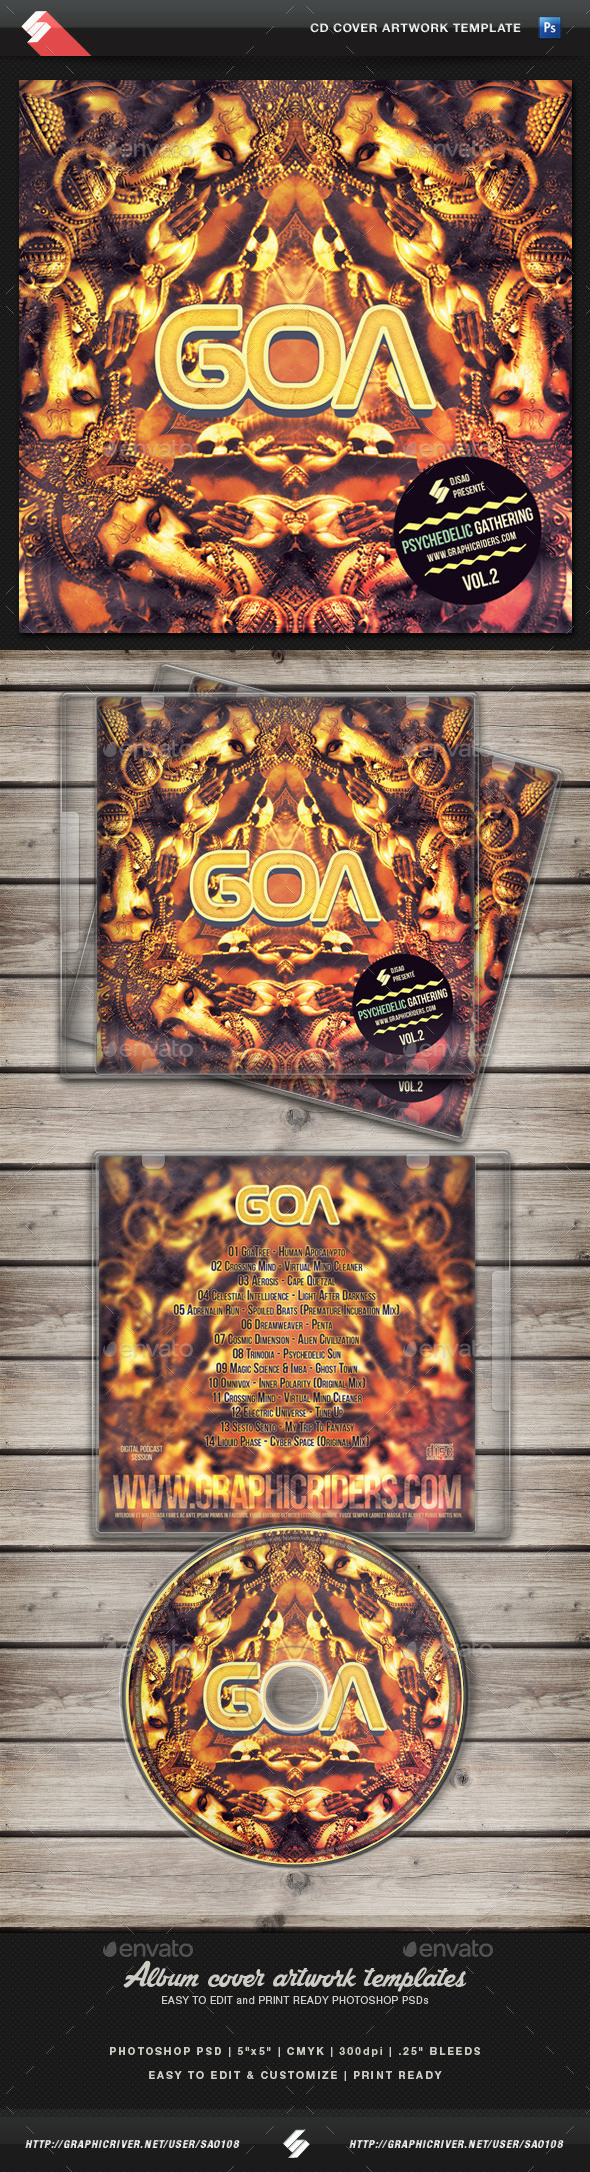 Goatrance vol2 cd cover template preview